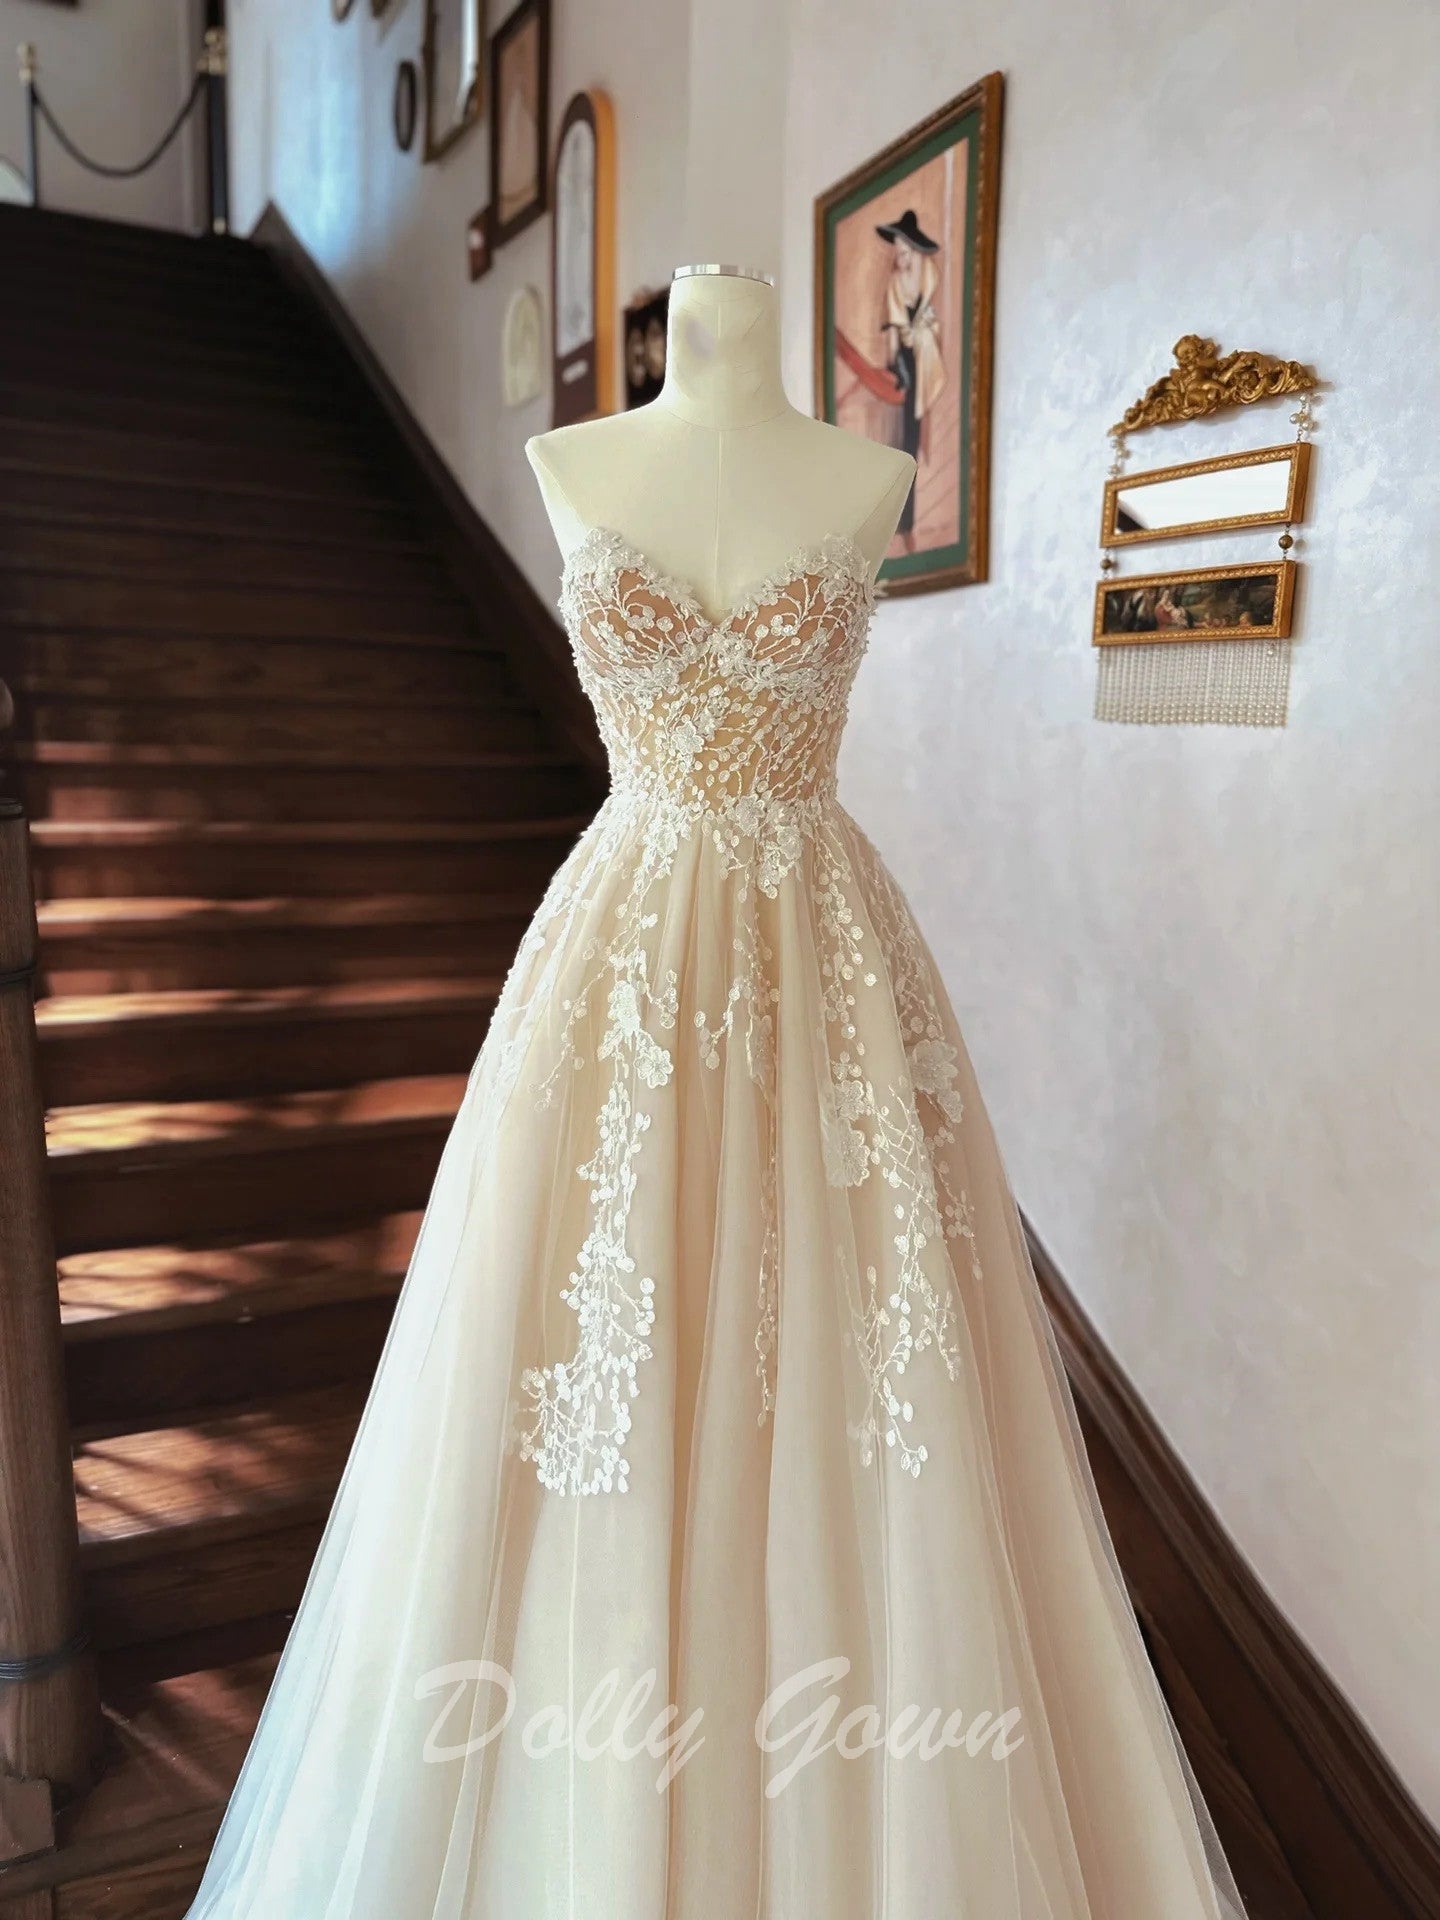 Fairy Illusion Lace Top A-line Sheer Flowy Champagne Wedding Dress